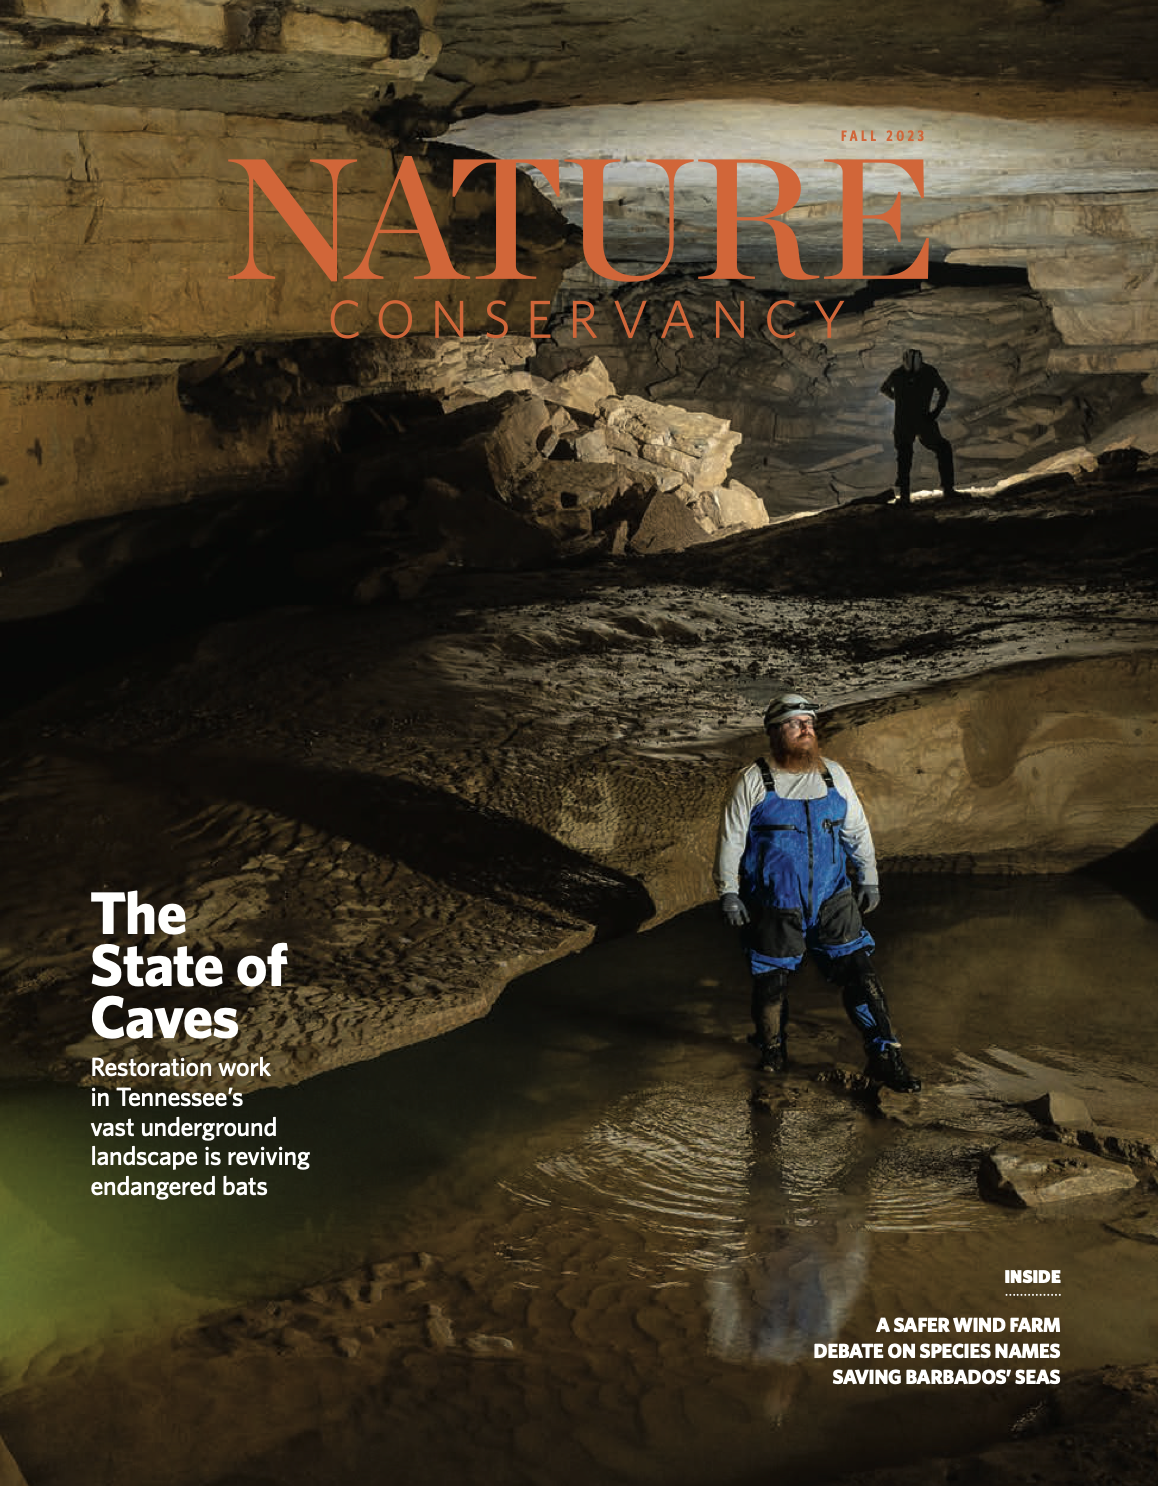 A magazine cover features a man wearing overalls and a headlamp standing in a cave.